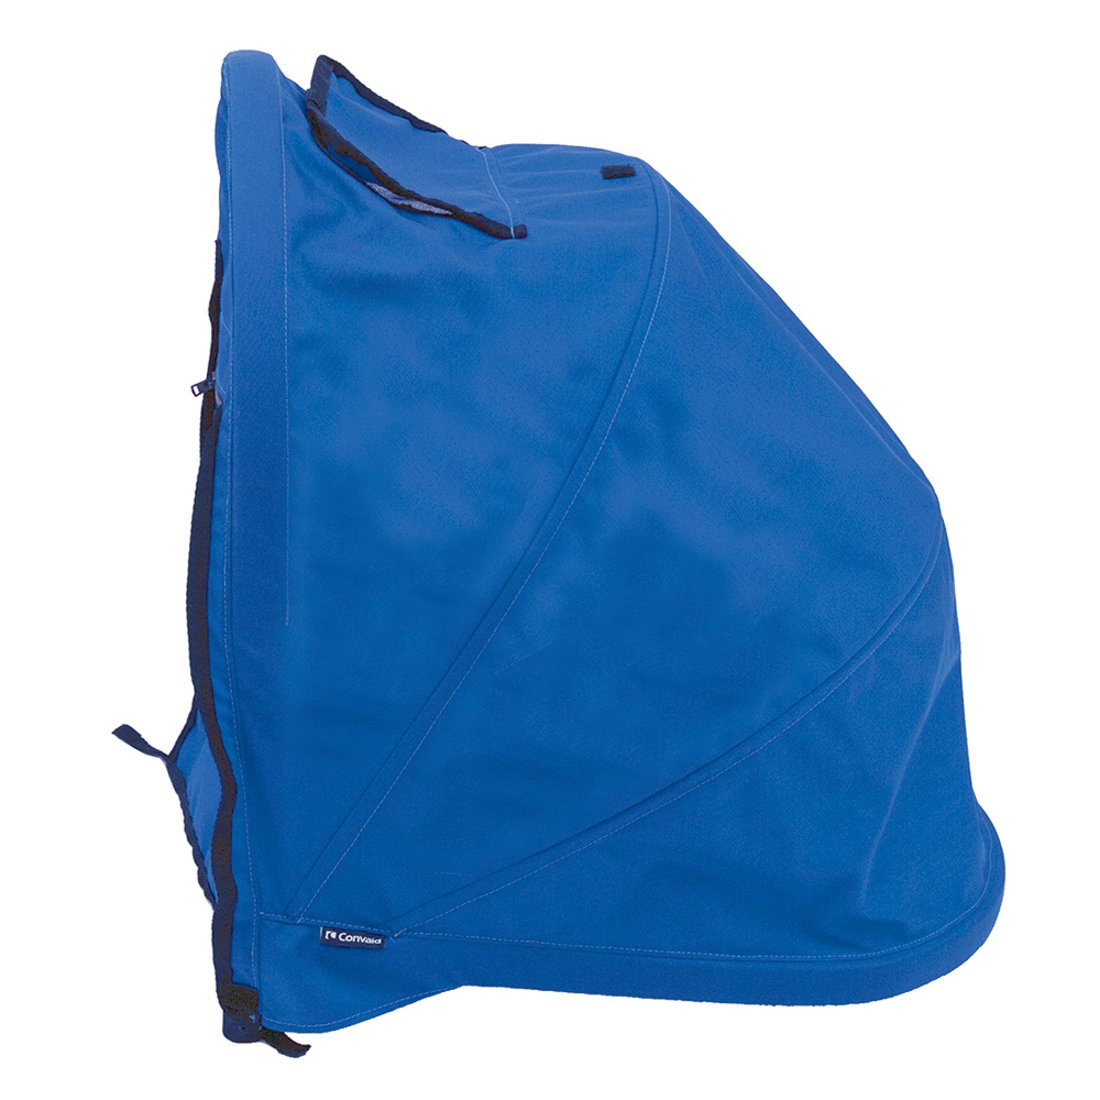 Extended Headrest Cover - No Windows (Canopy)